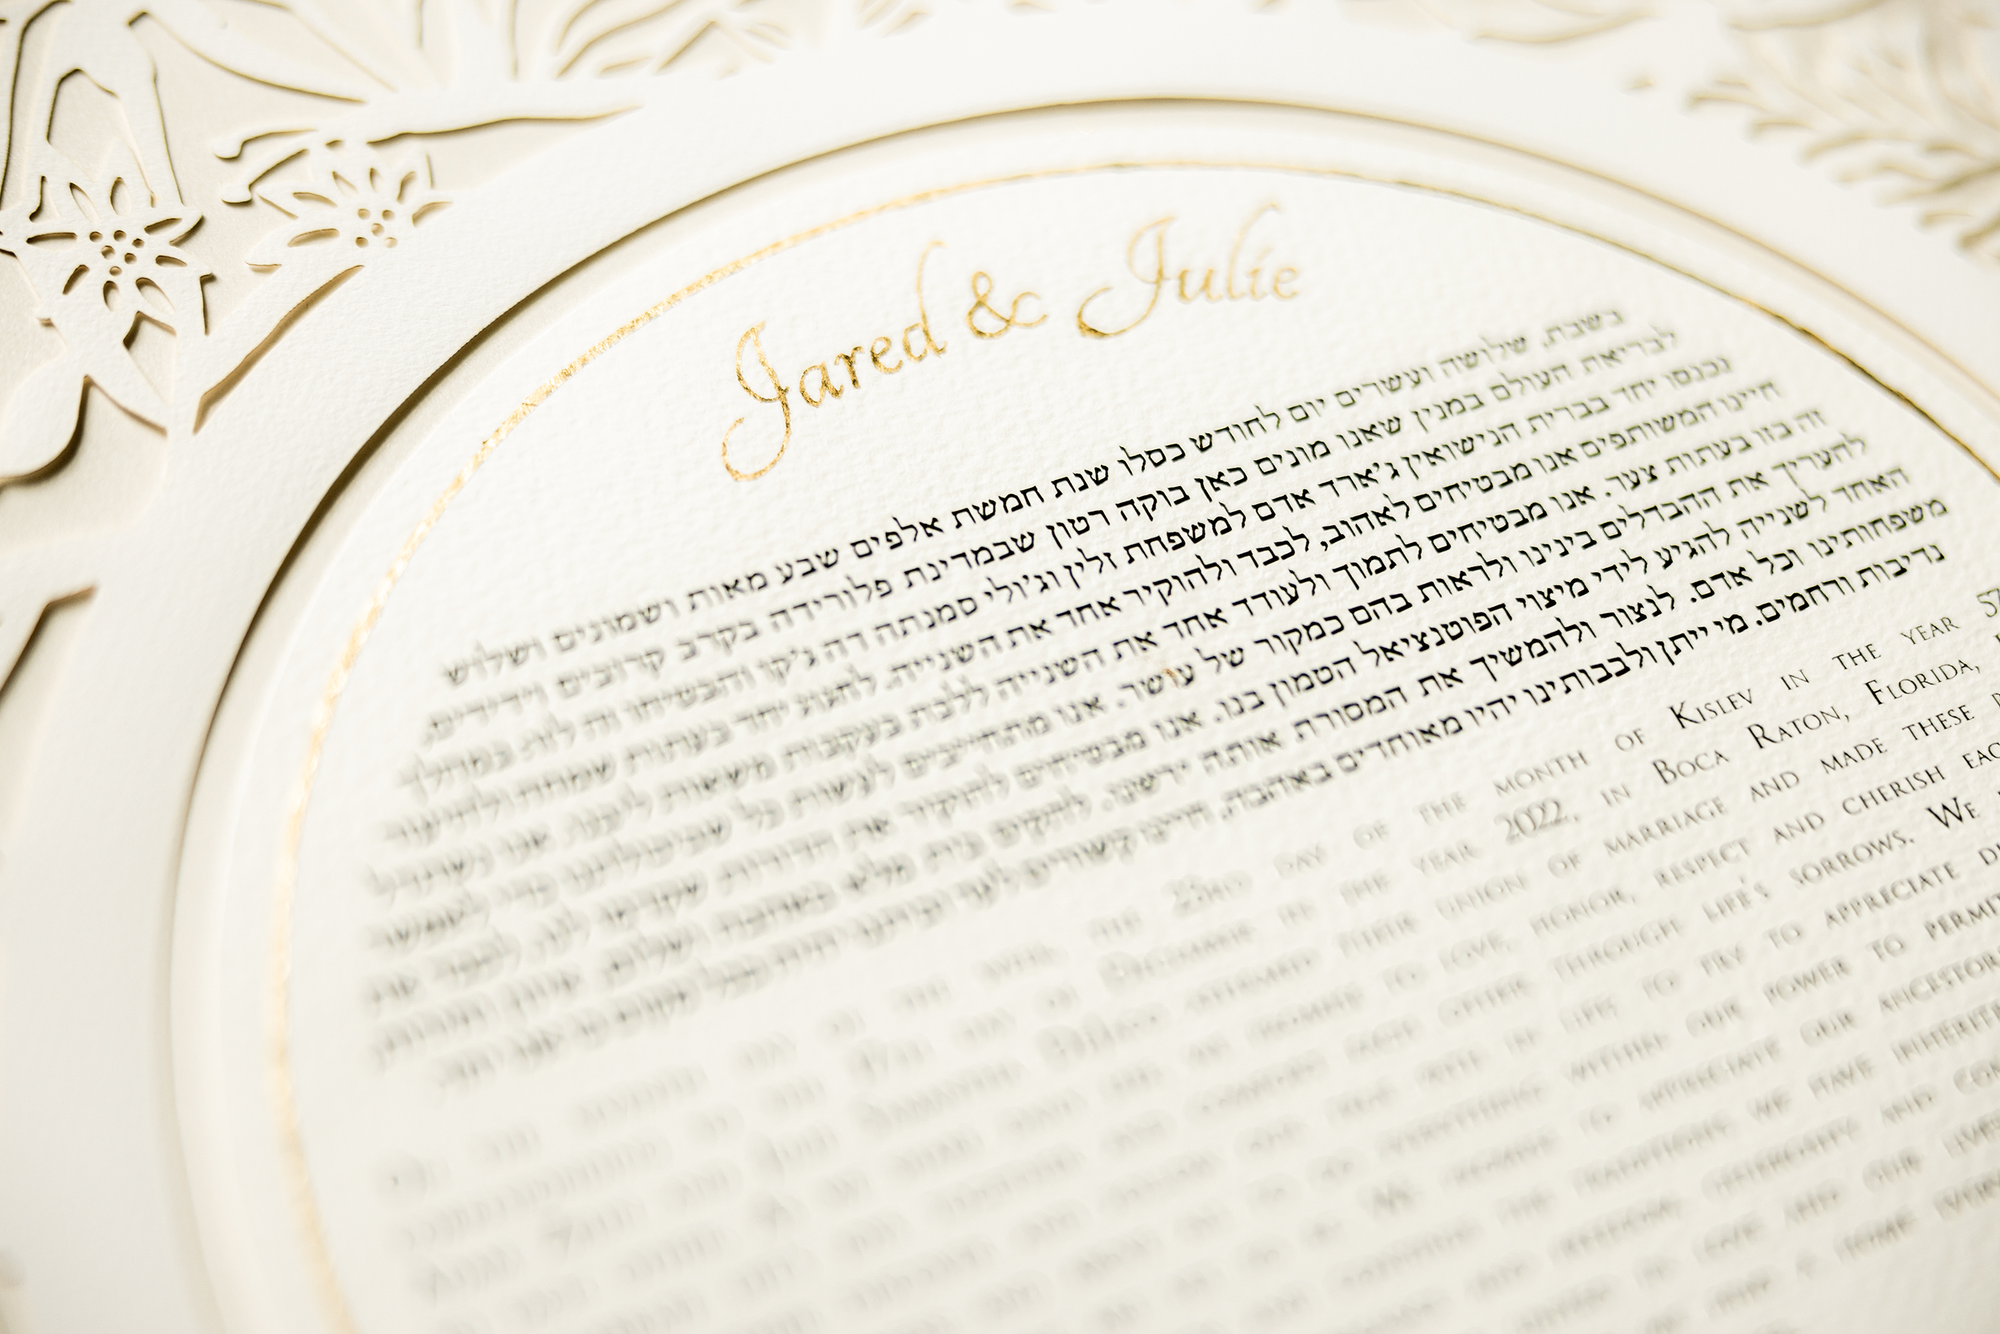 Song of Song ketubah